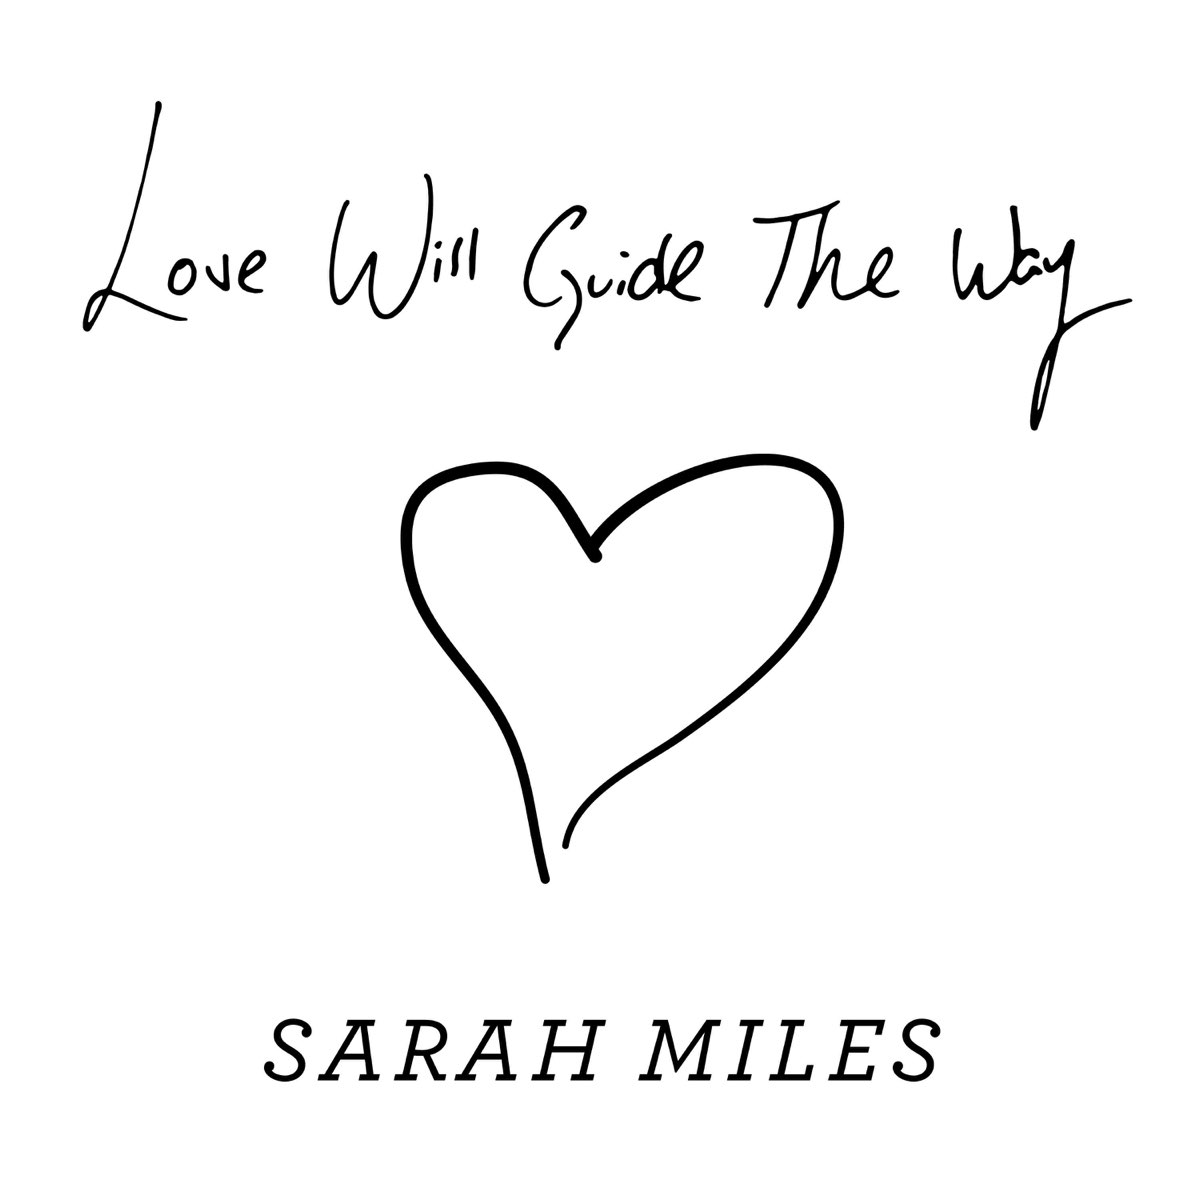 Love miles. Sarah manners. Miles if Love.